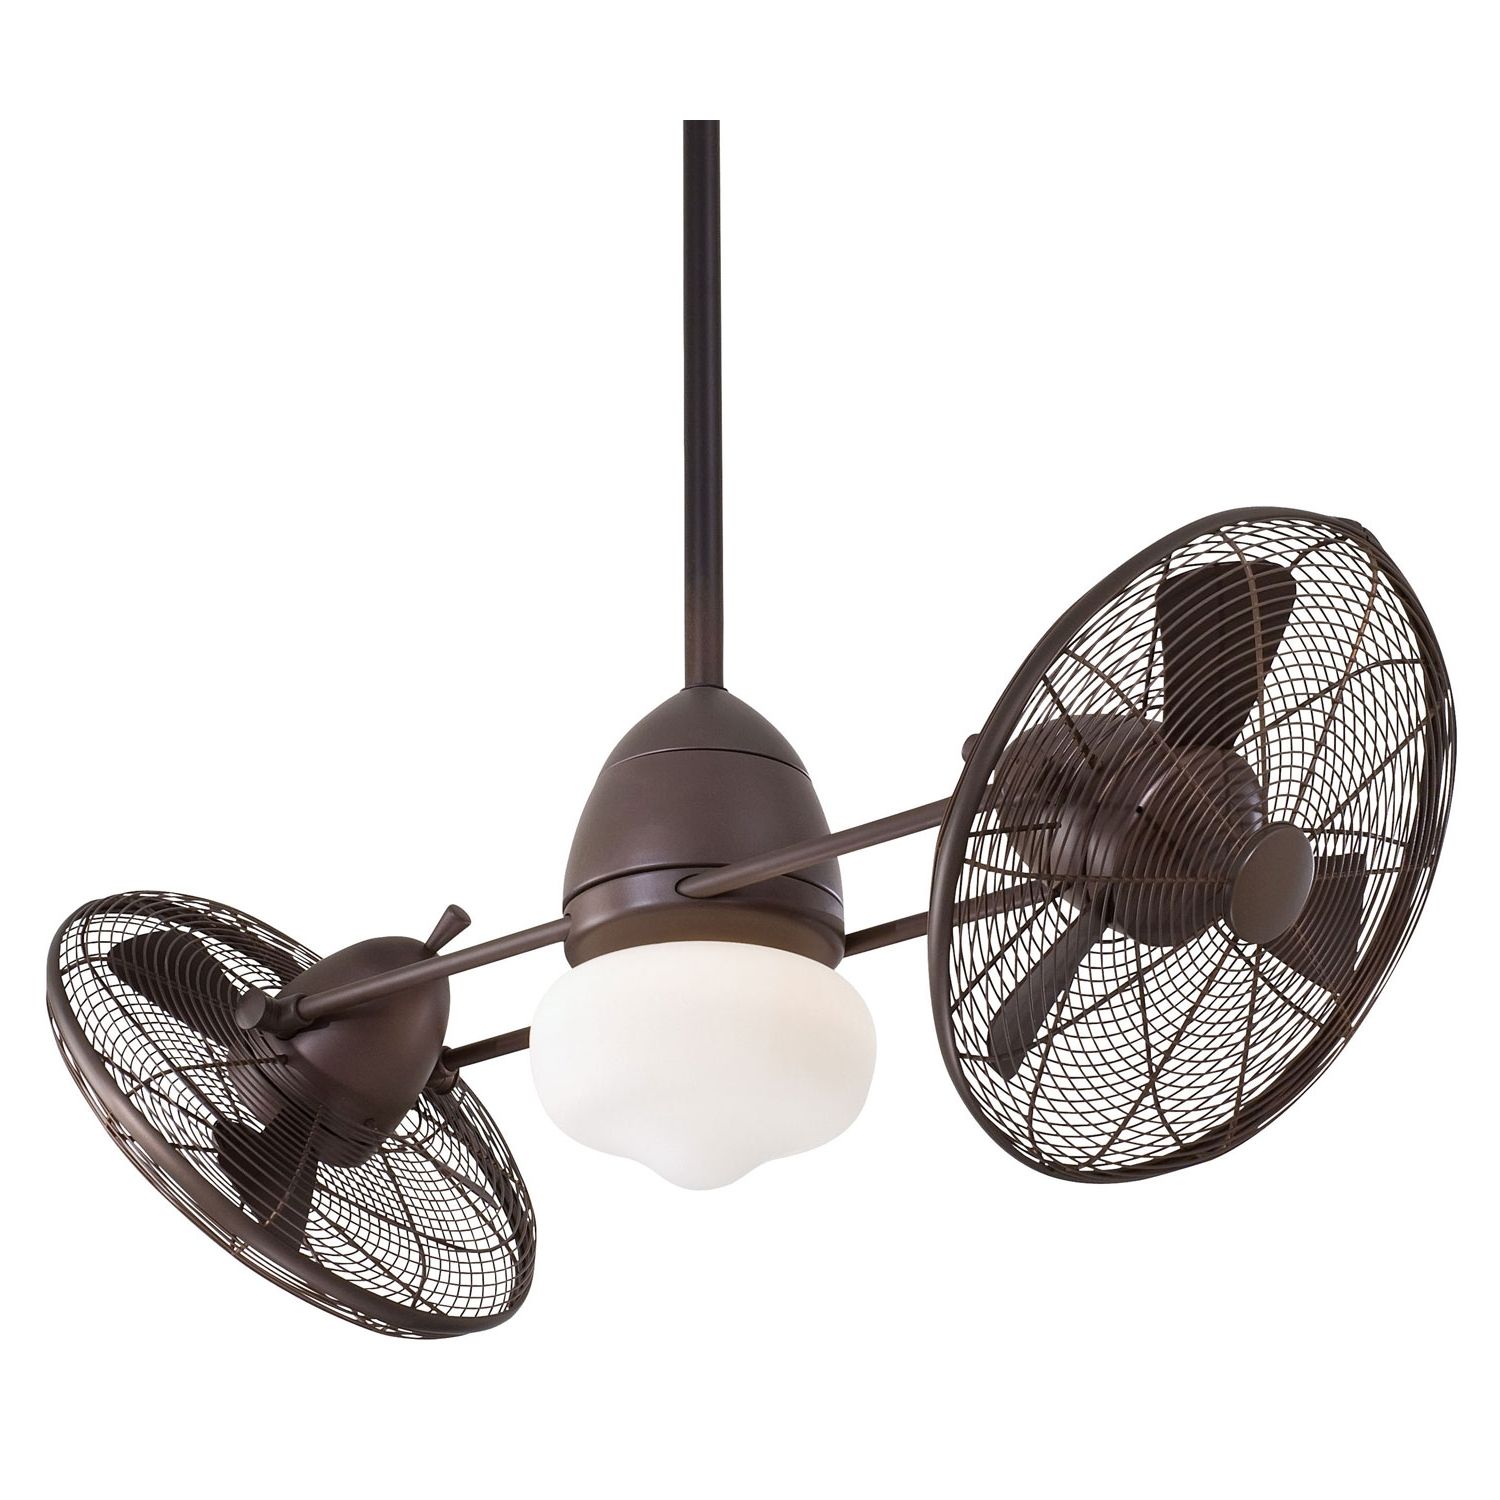 Widely Used 42 Inch Outdoor Ceiling Fans With Lights In Minka Aire 42 Inch Gyro Wet Indoor/outdoor Oil Rubbed Bronze Ceiling (View 6 of 20)